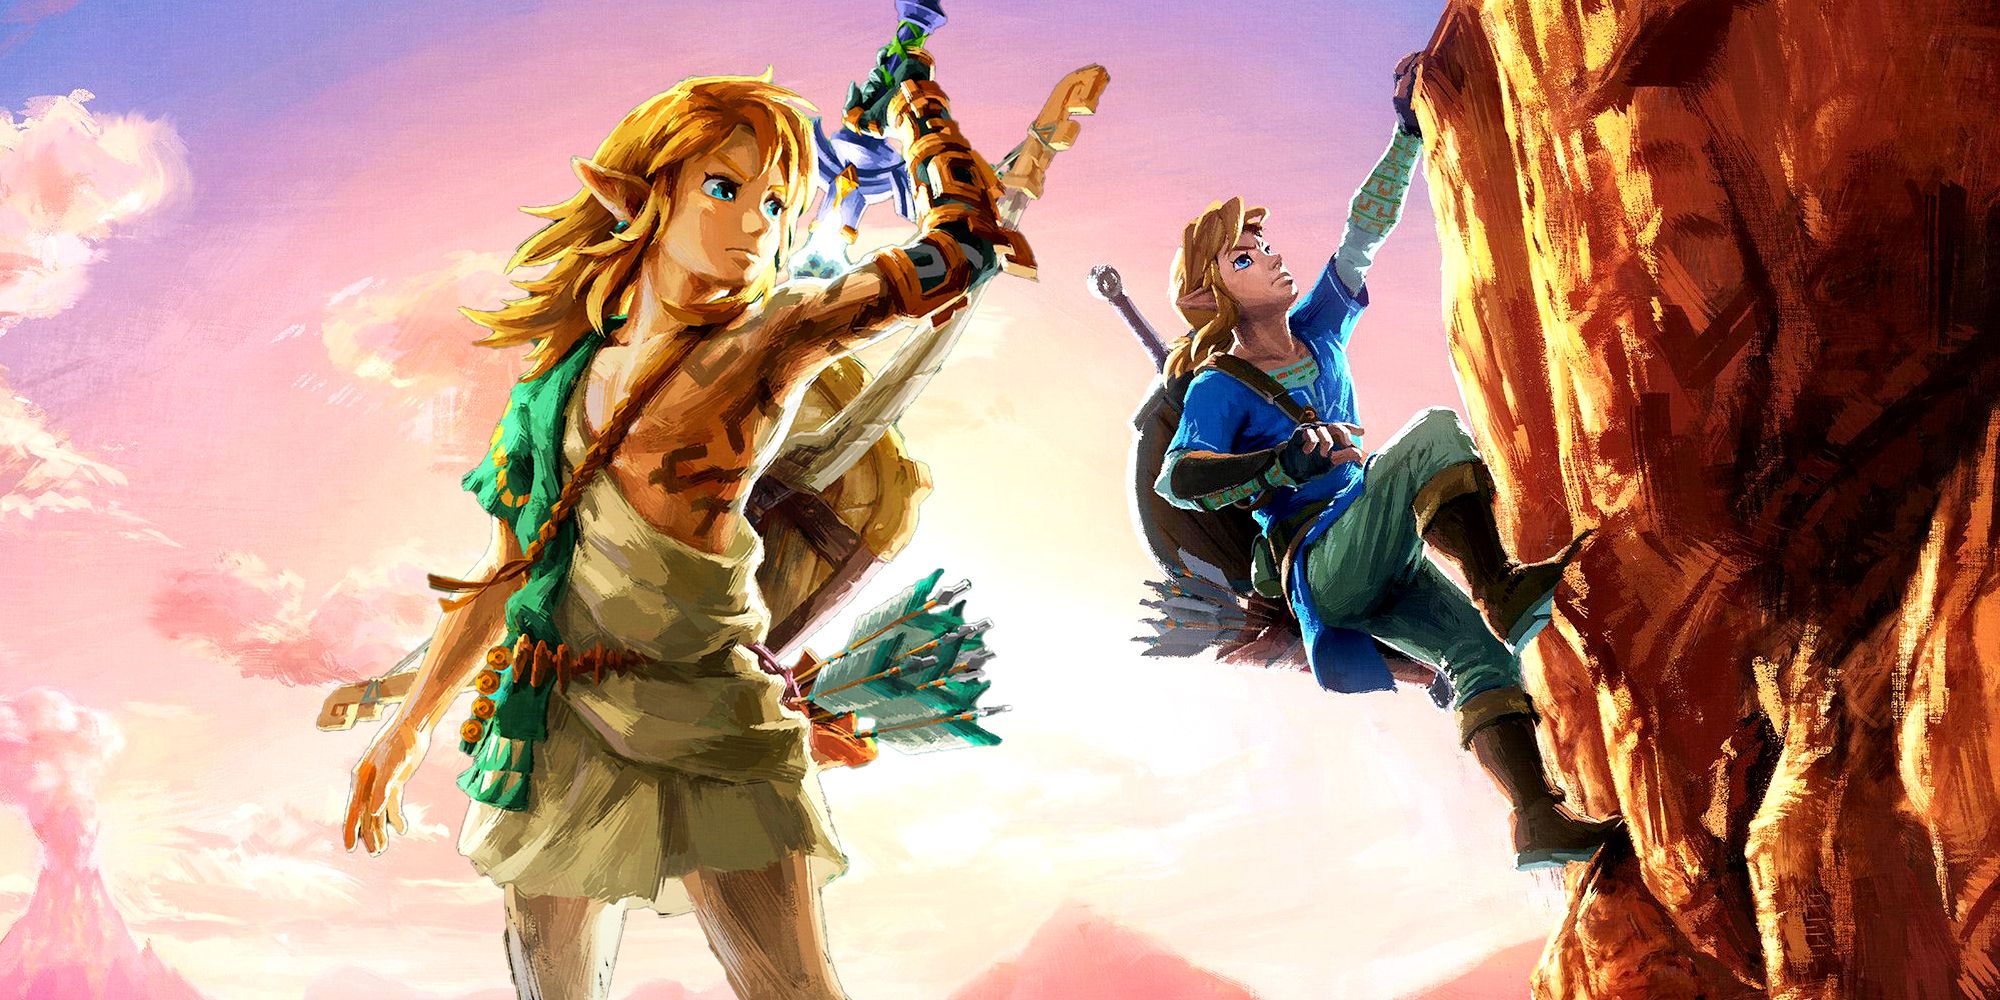 Link from Tears of the Kingdom standing and reaching for the Master Sword on his back with his new Zonai arm, while Link from Breath of the Wild climbs a cliff in the background against a pink sunset sky.